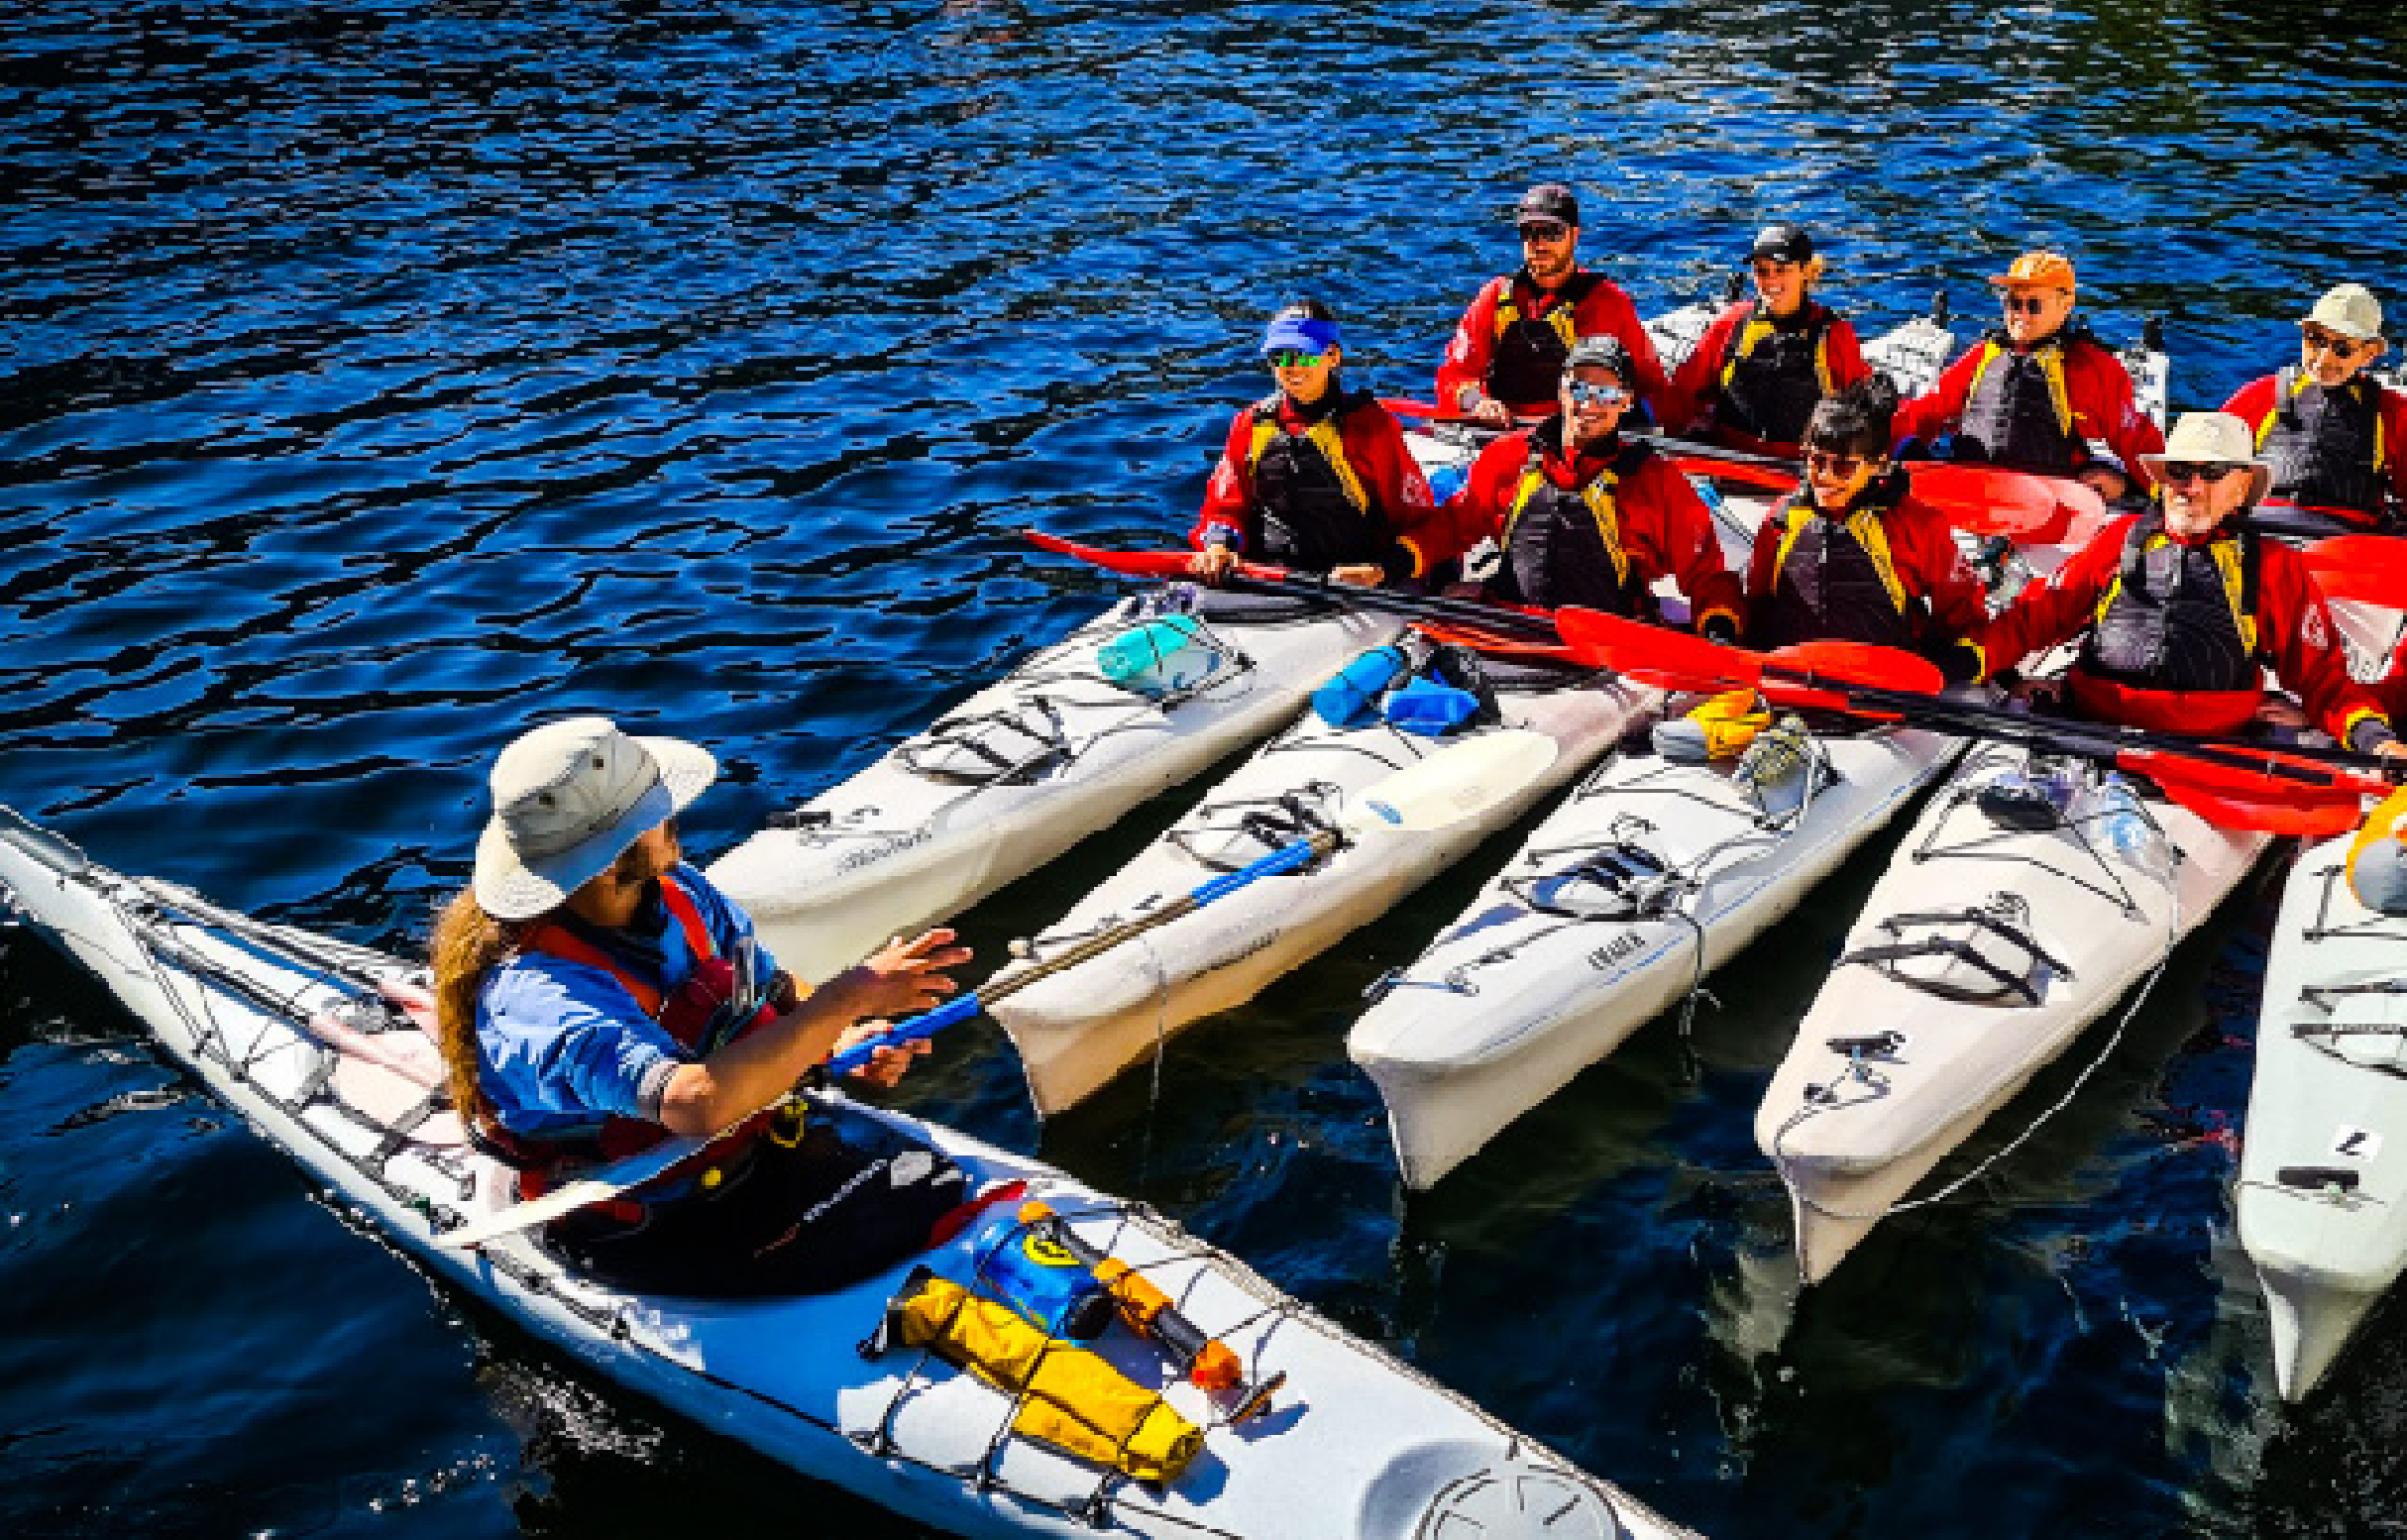 Five kayaks rafted together and guide speaking to kayakers